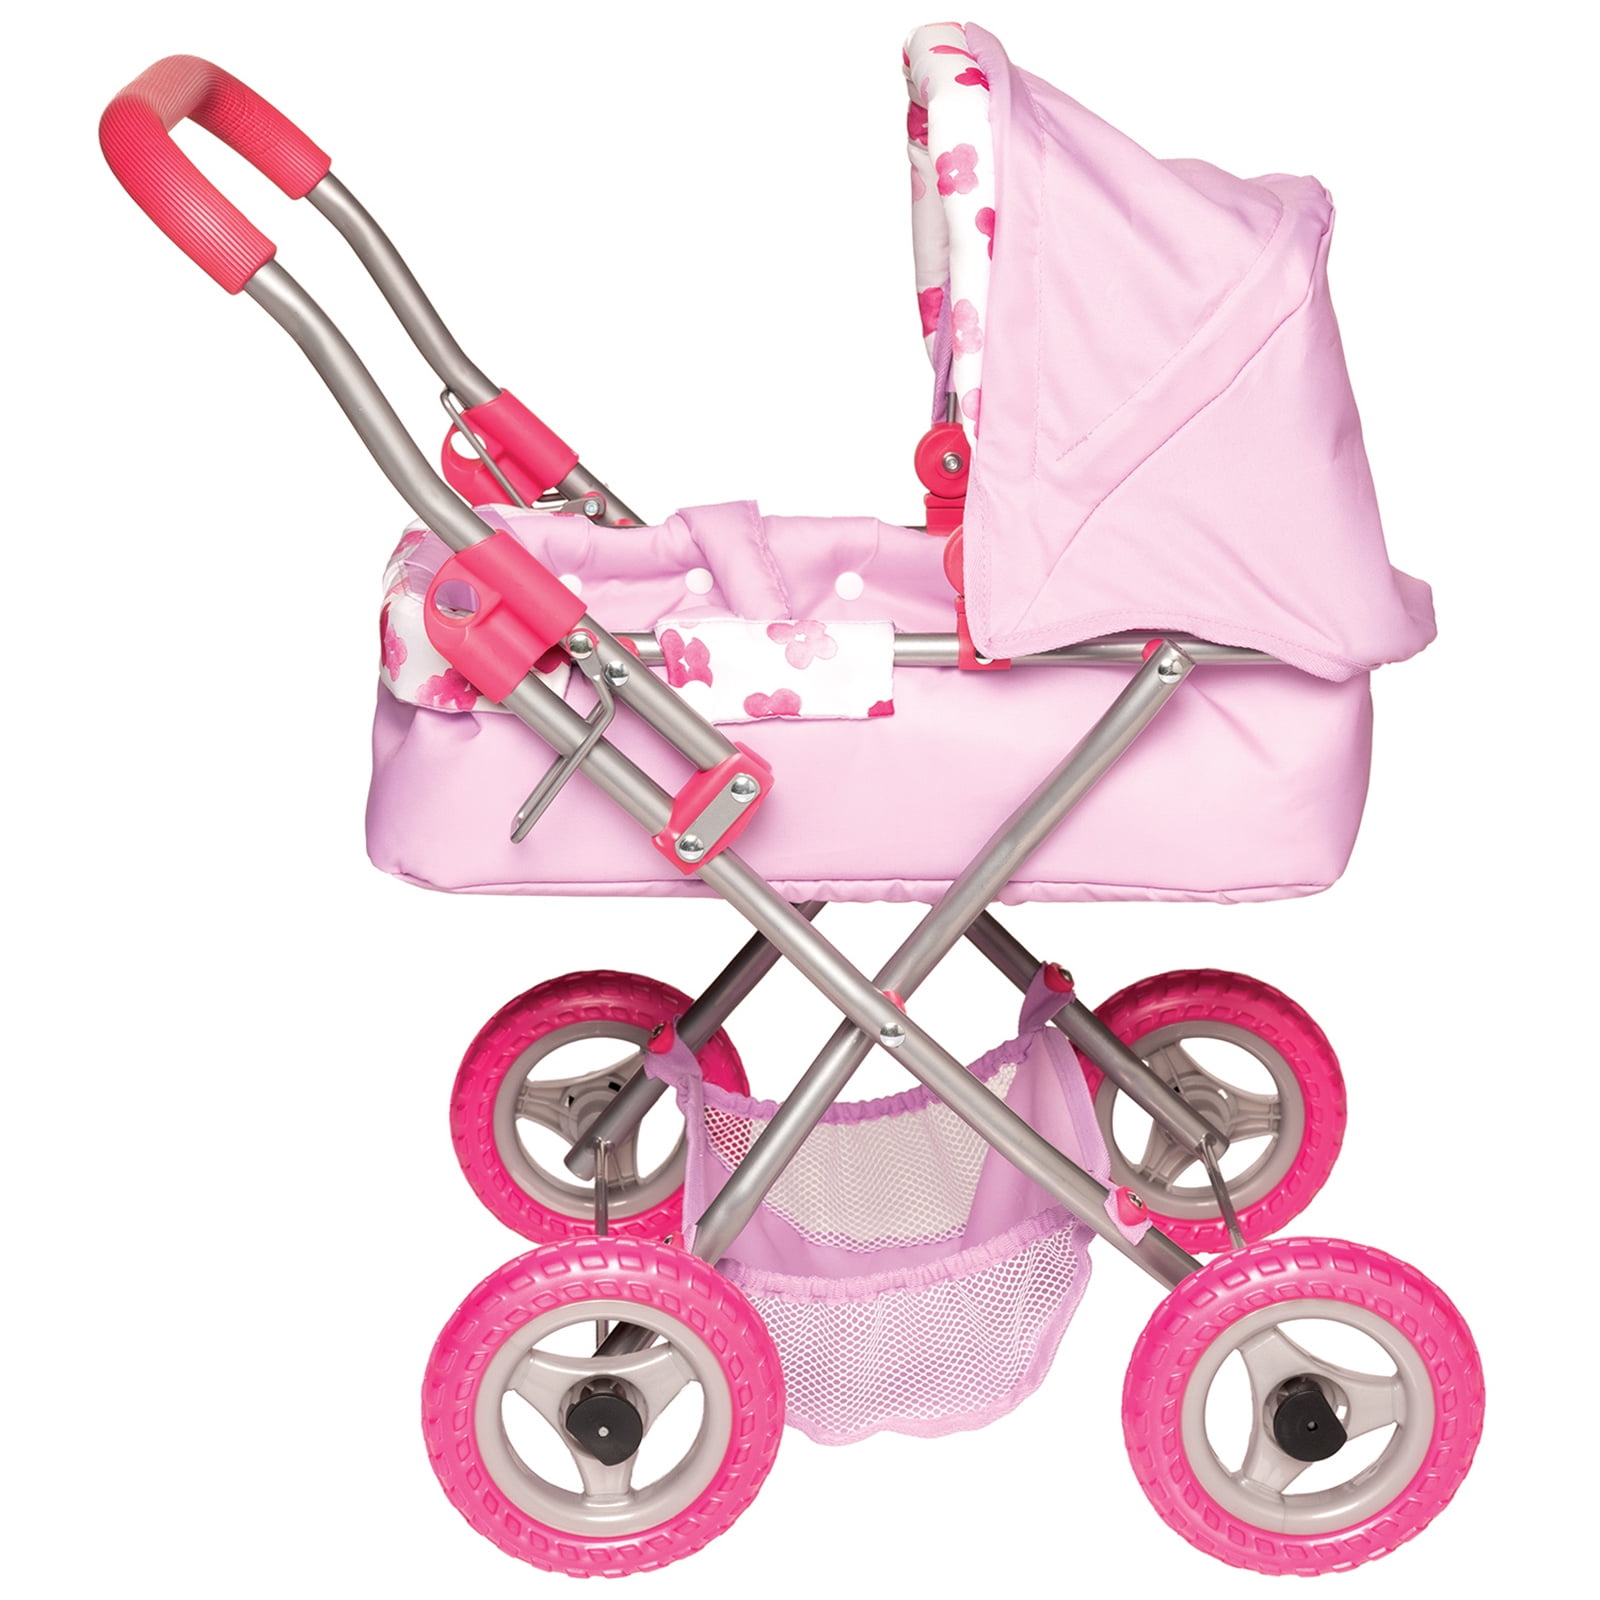 Details about   Snuggles Deluxe Dolls Buggy Dolls Pushchair Pram Fun Roll Play Toy 